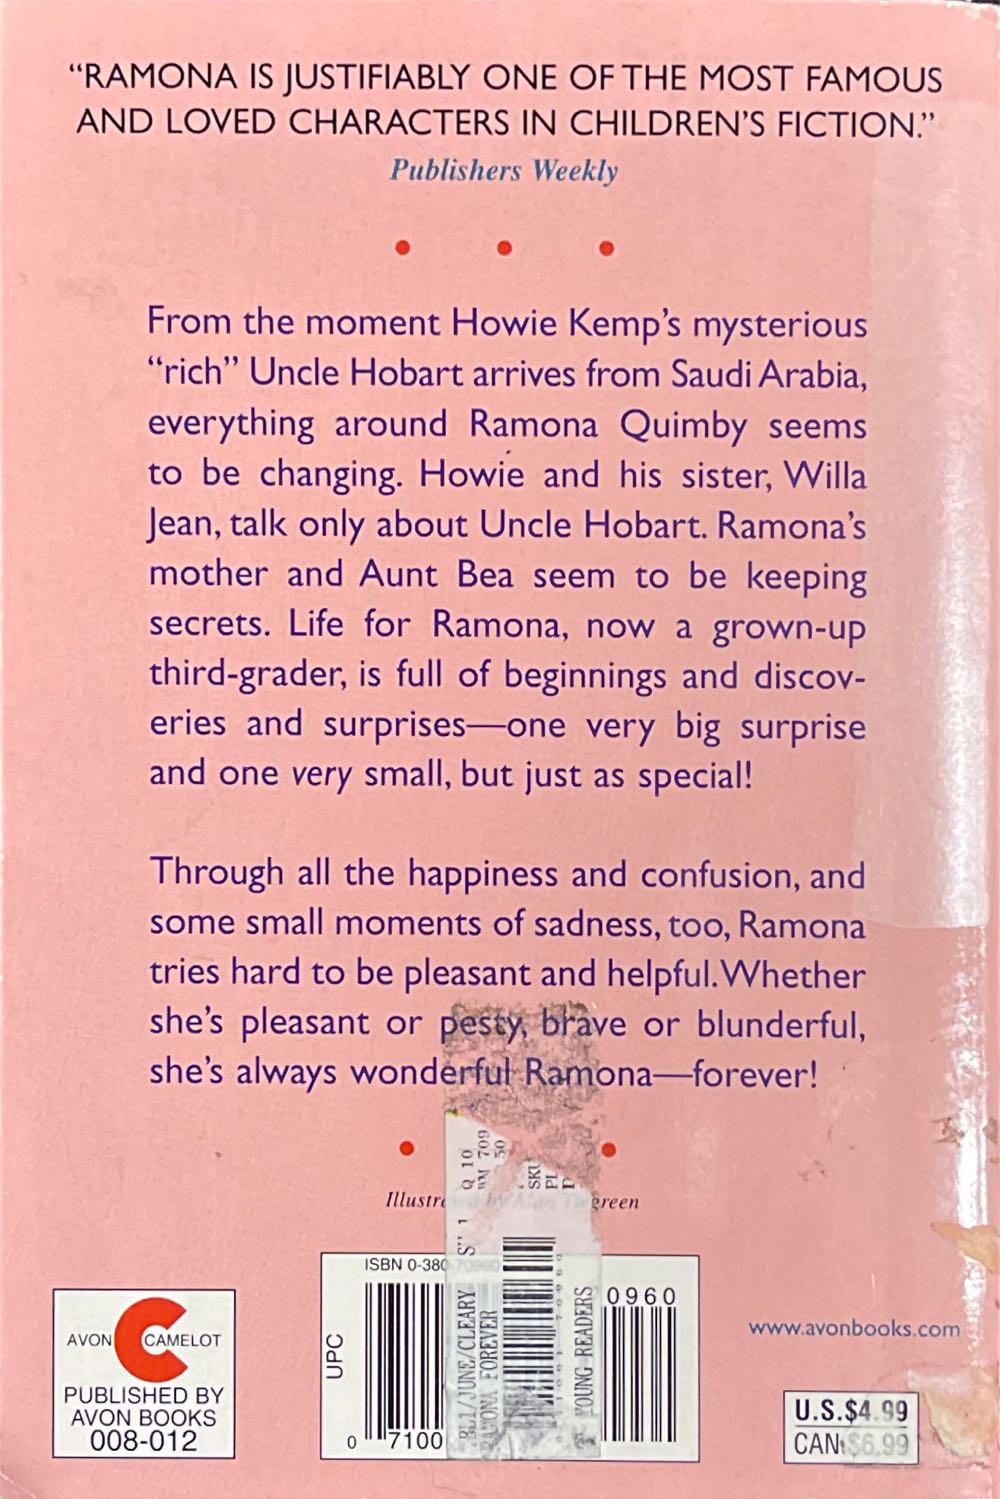 Ramona Forever - Beverly Cleary (HarperTrophy - Paperback) book collectible - Main Image 2